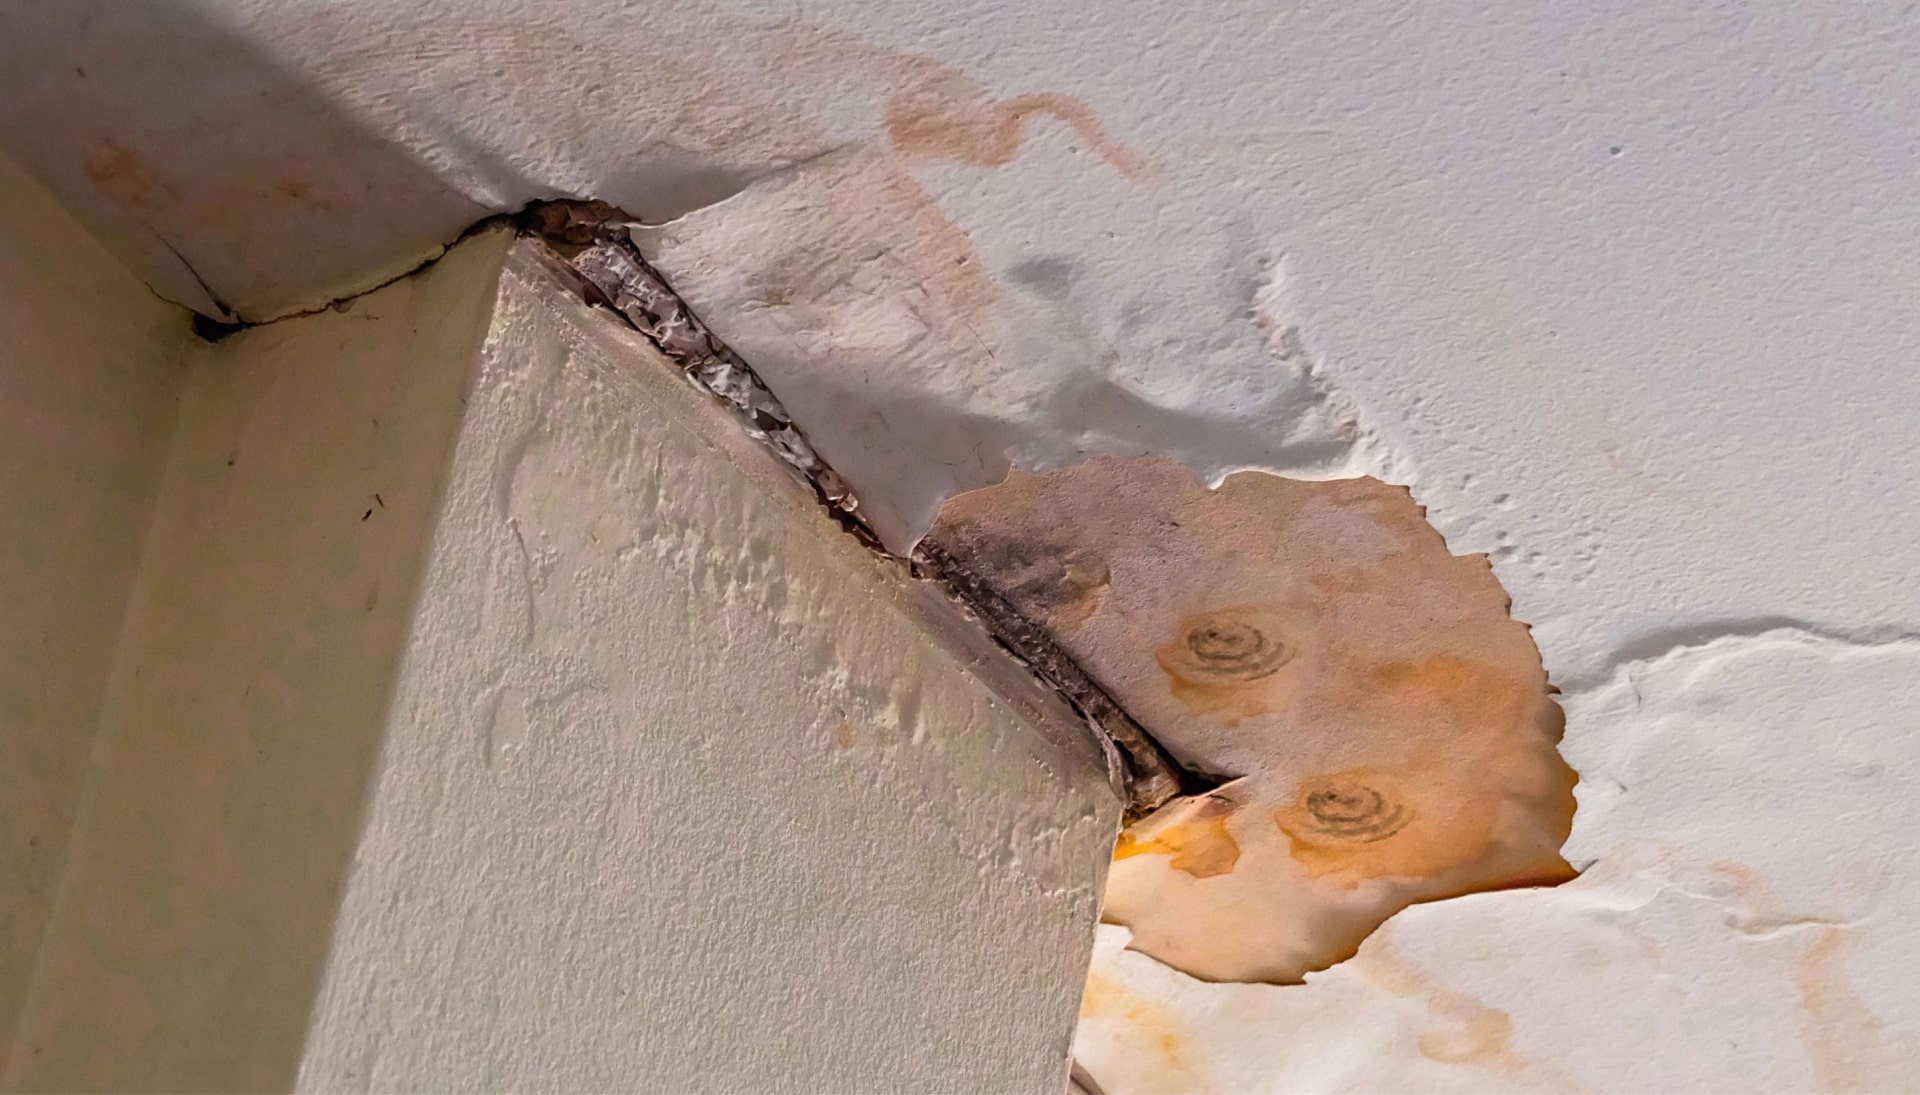 The structure of a building is at risk after extensive ceiling water damage is found during water damage repair services in a home in Burlington, VT.